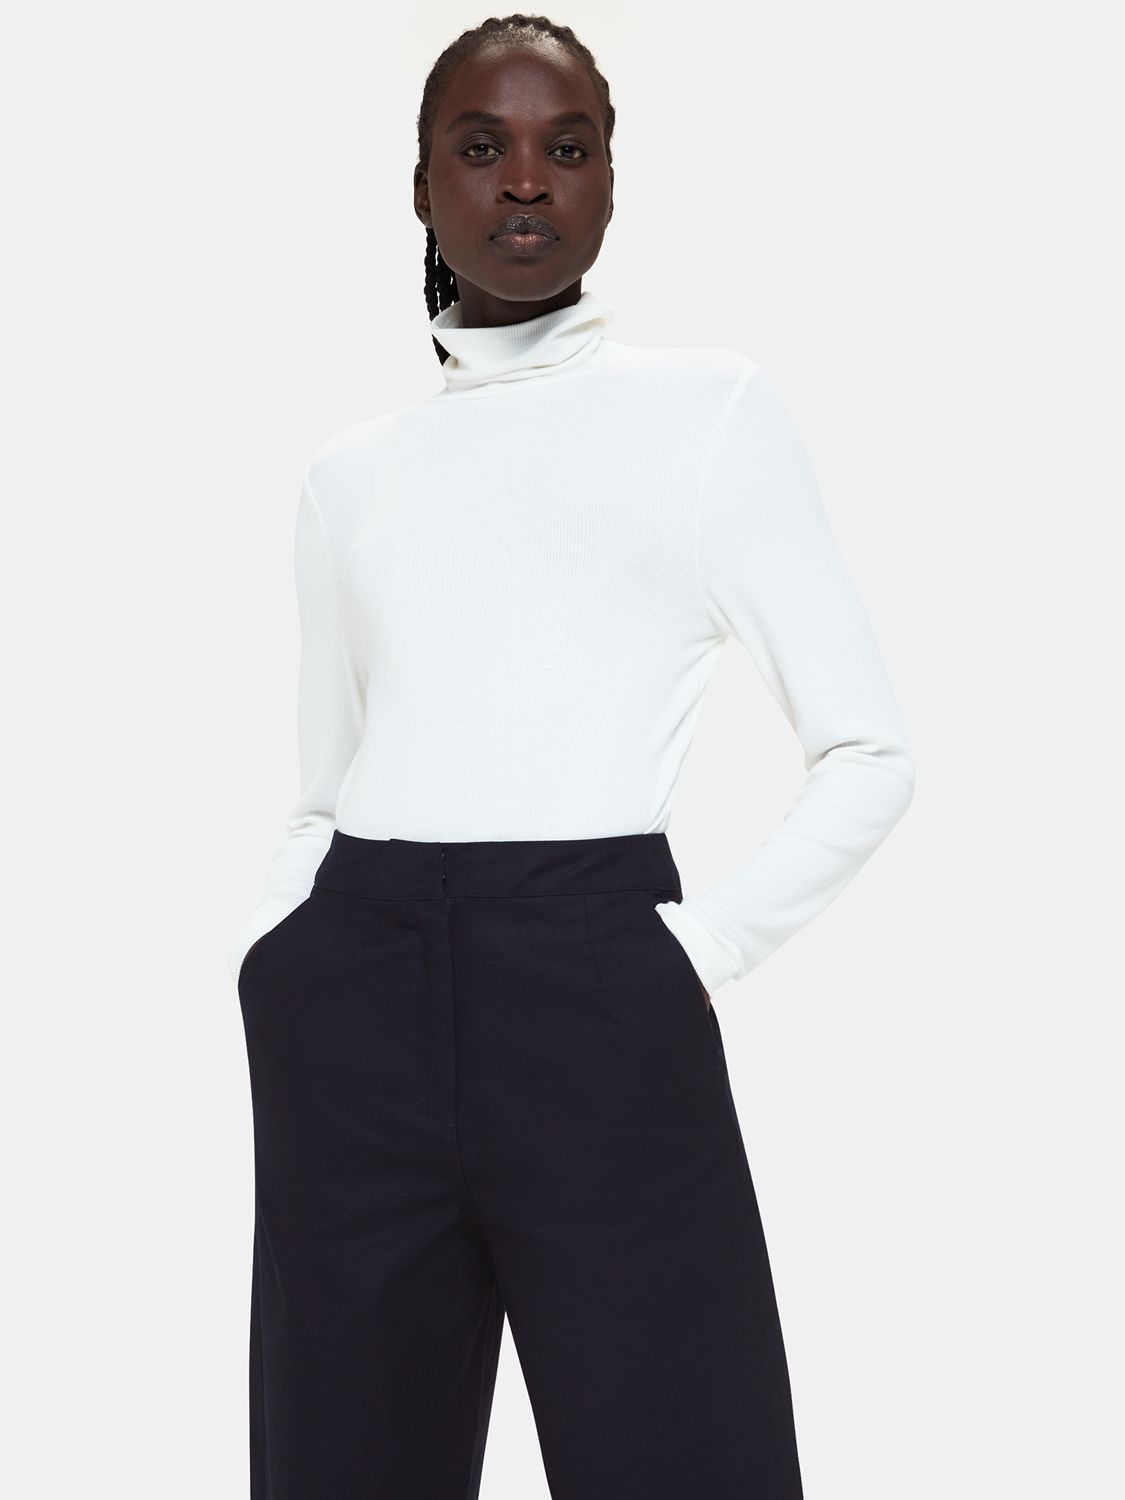 Buy Whistles Carla Barrel Cotton Trousers, Navy Online at johnlewis.com